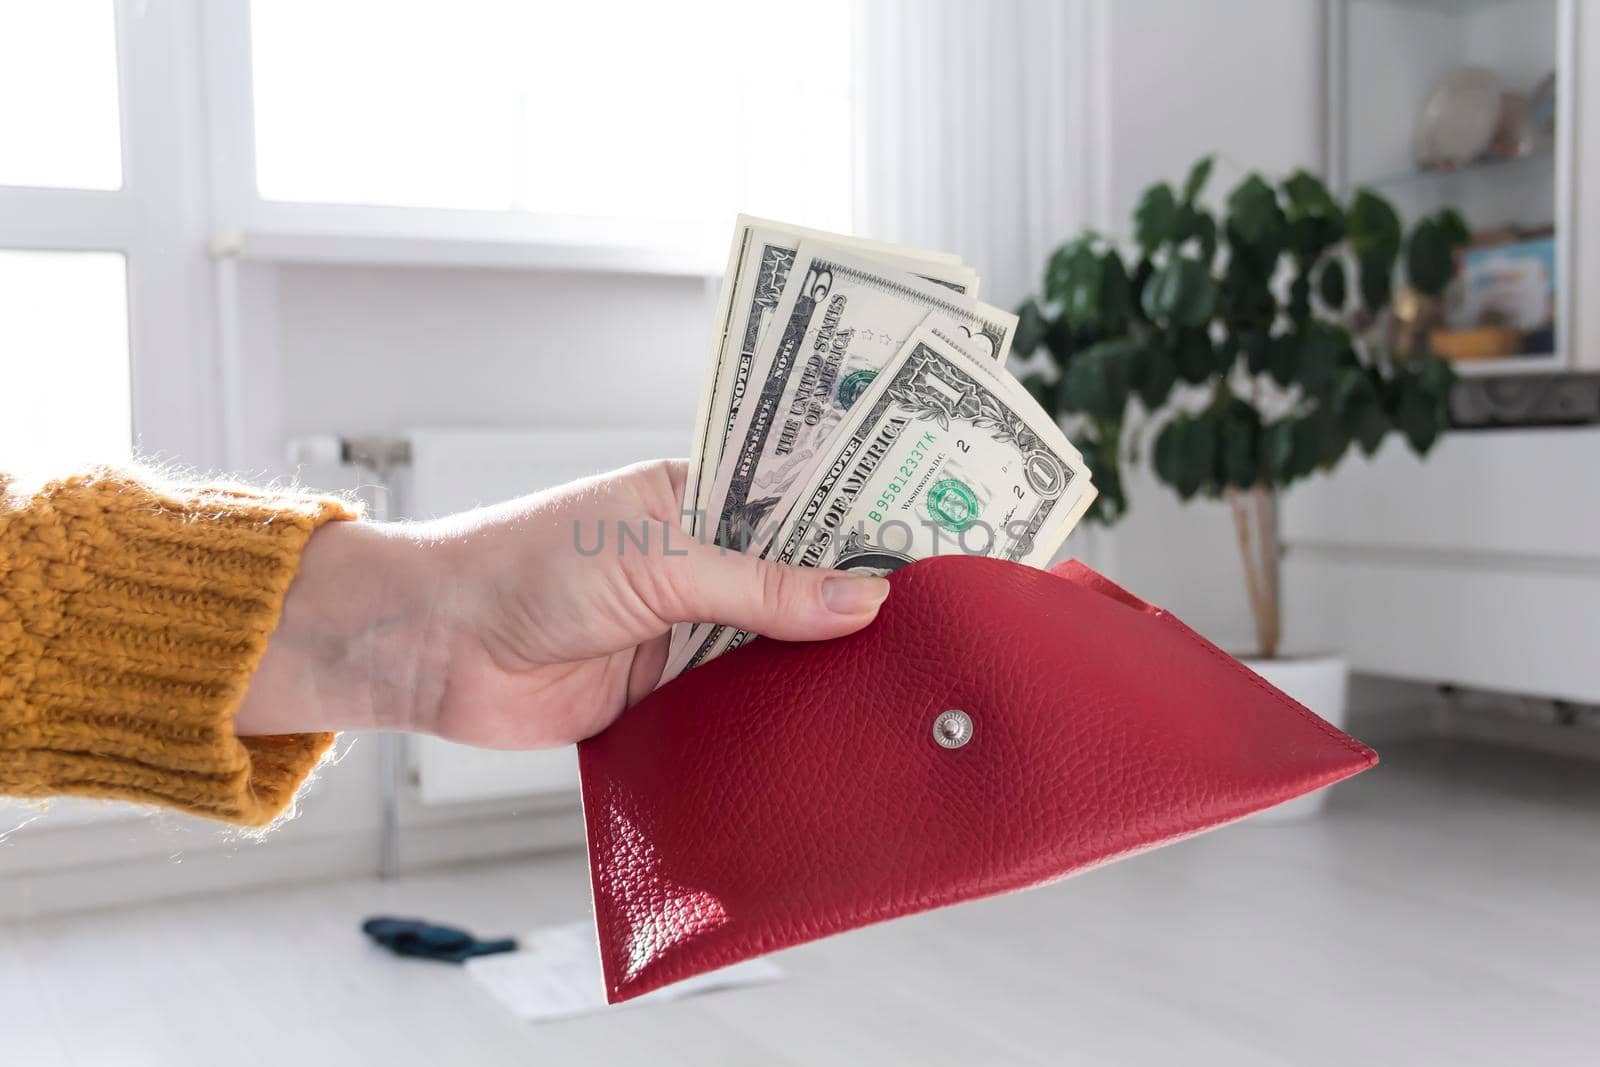 Women's hands in a yellow sweater are holding an open, red purse with money..